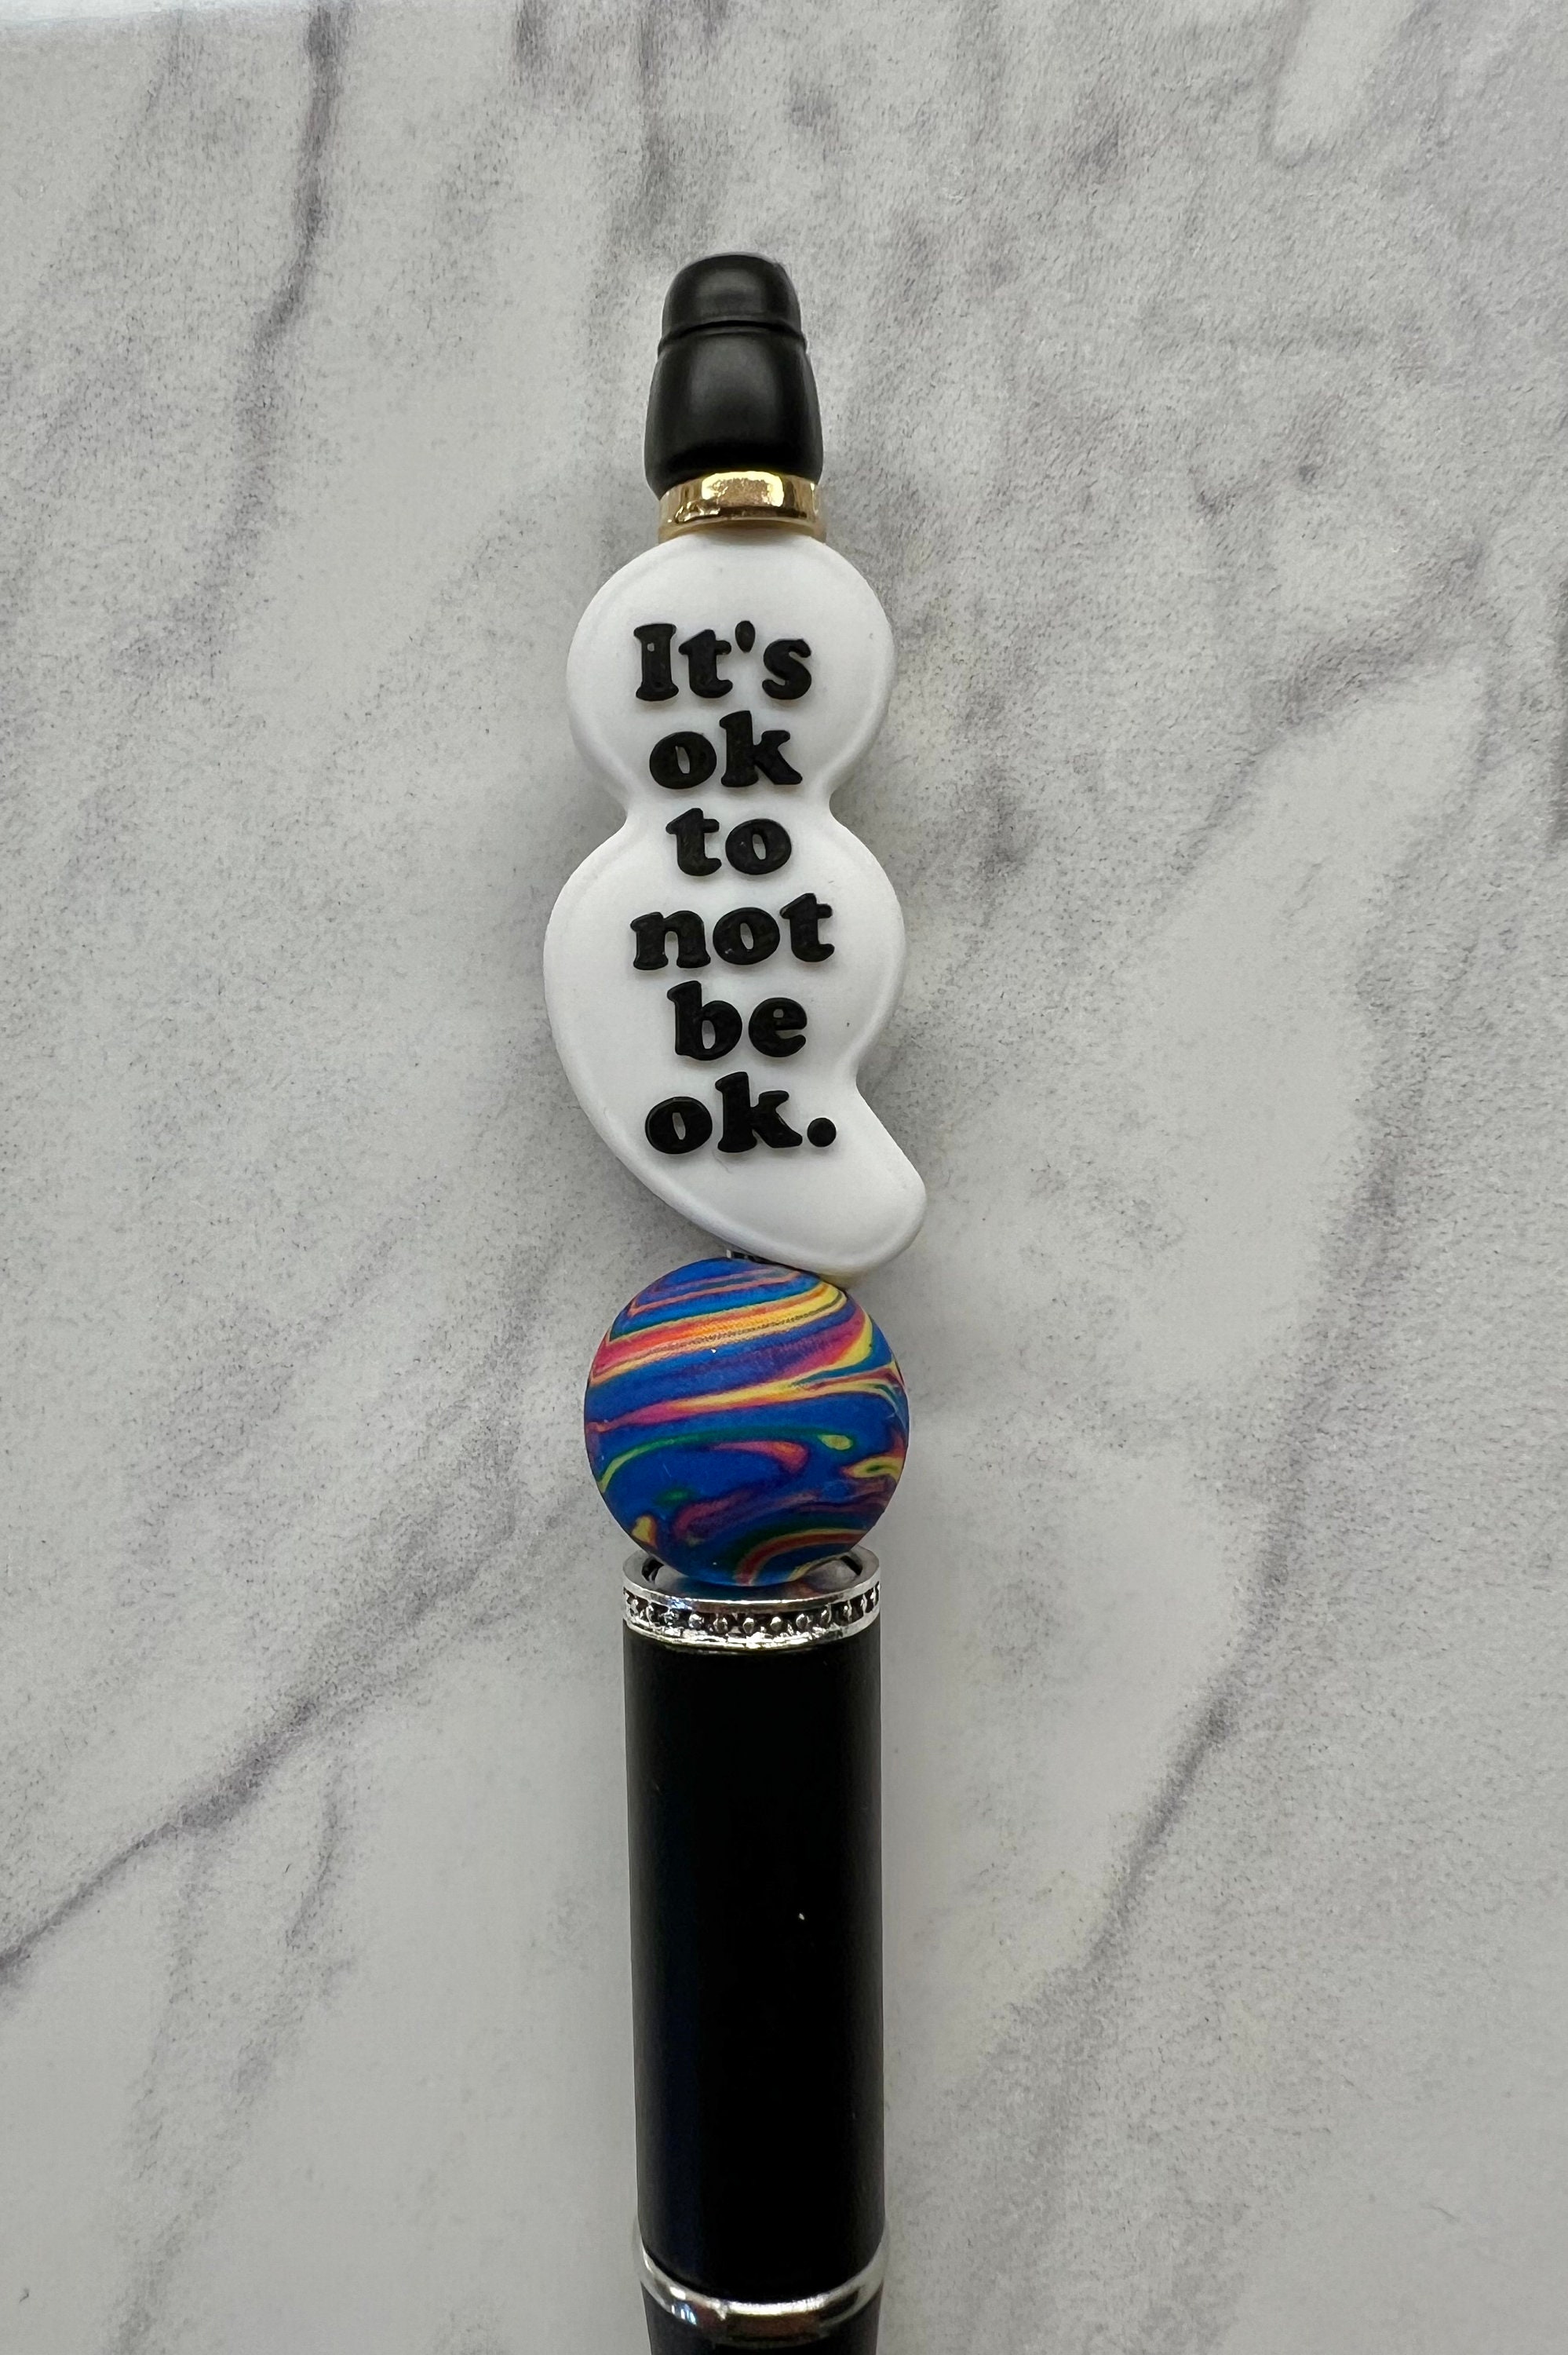 Funny Sayings Silicone Focal Bead Pens, Silicone Focal Beads